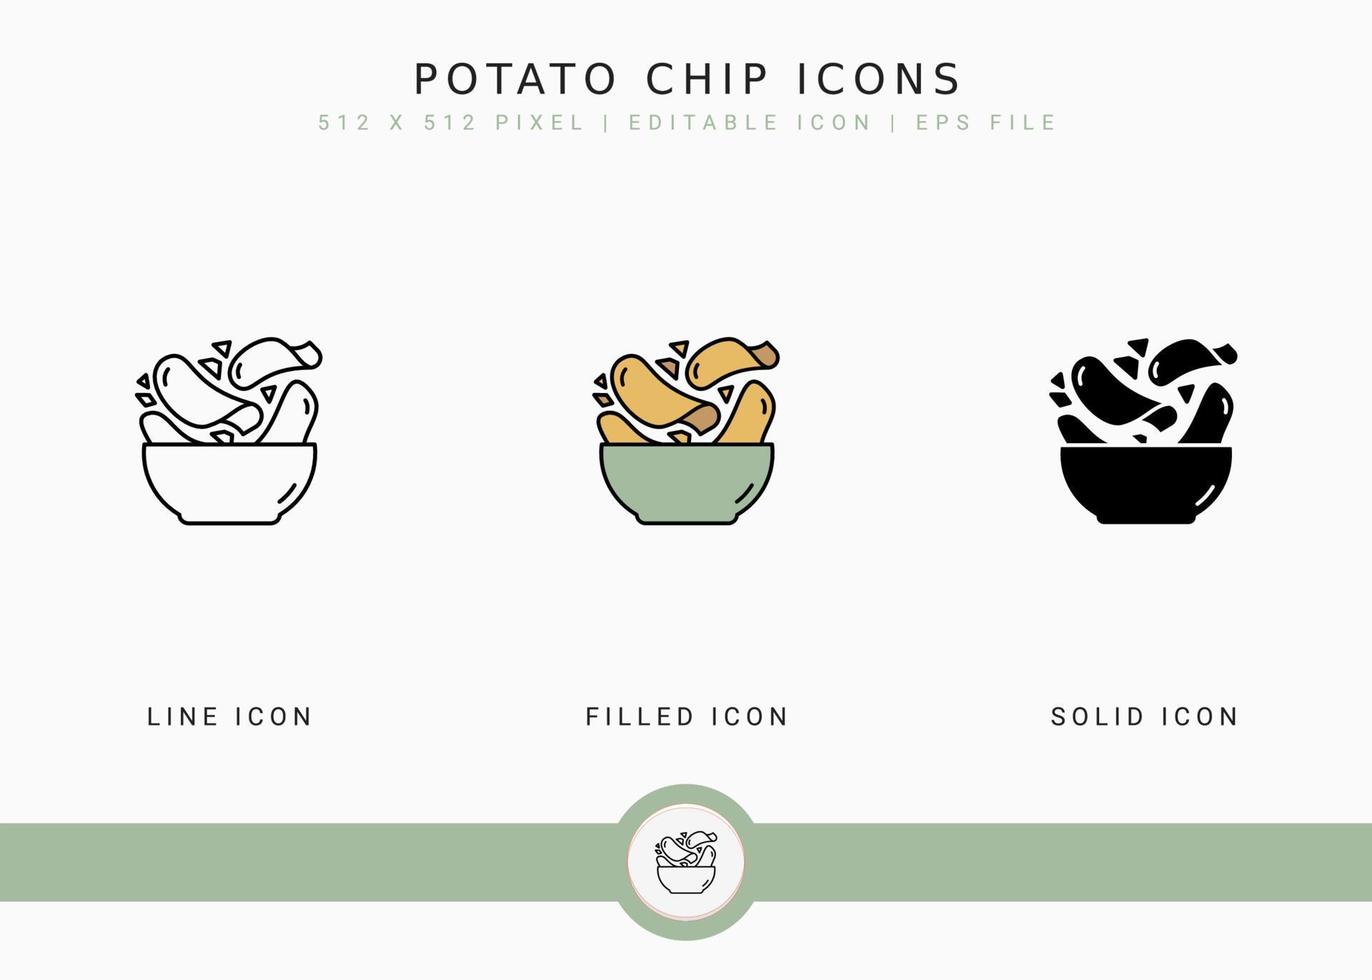 Potato Chip Icons set vector illustration with solid icon line style. Crisp Snack concept. Editable stroke icon on isolated background for web design, user interface, and mobile application